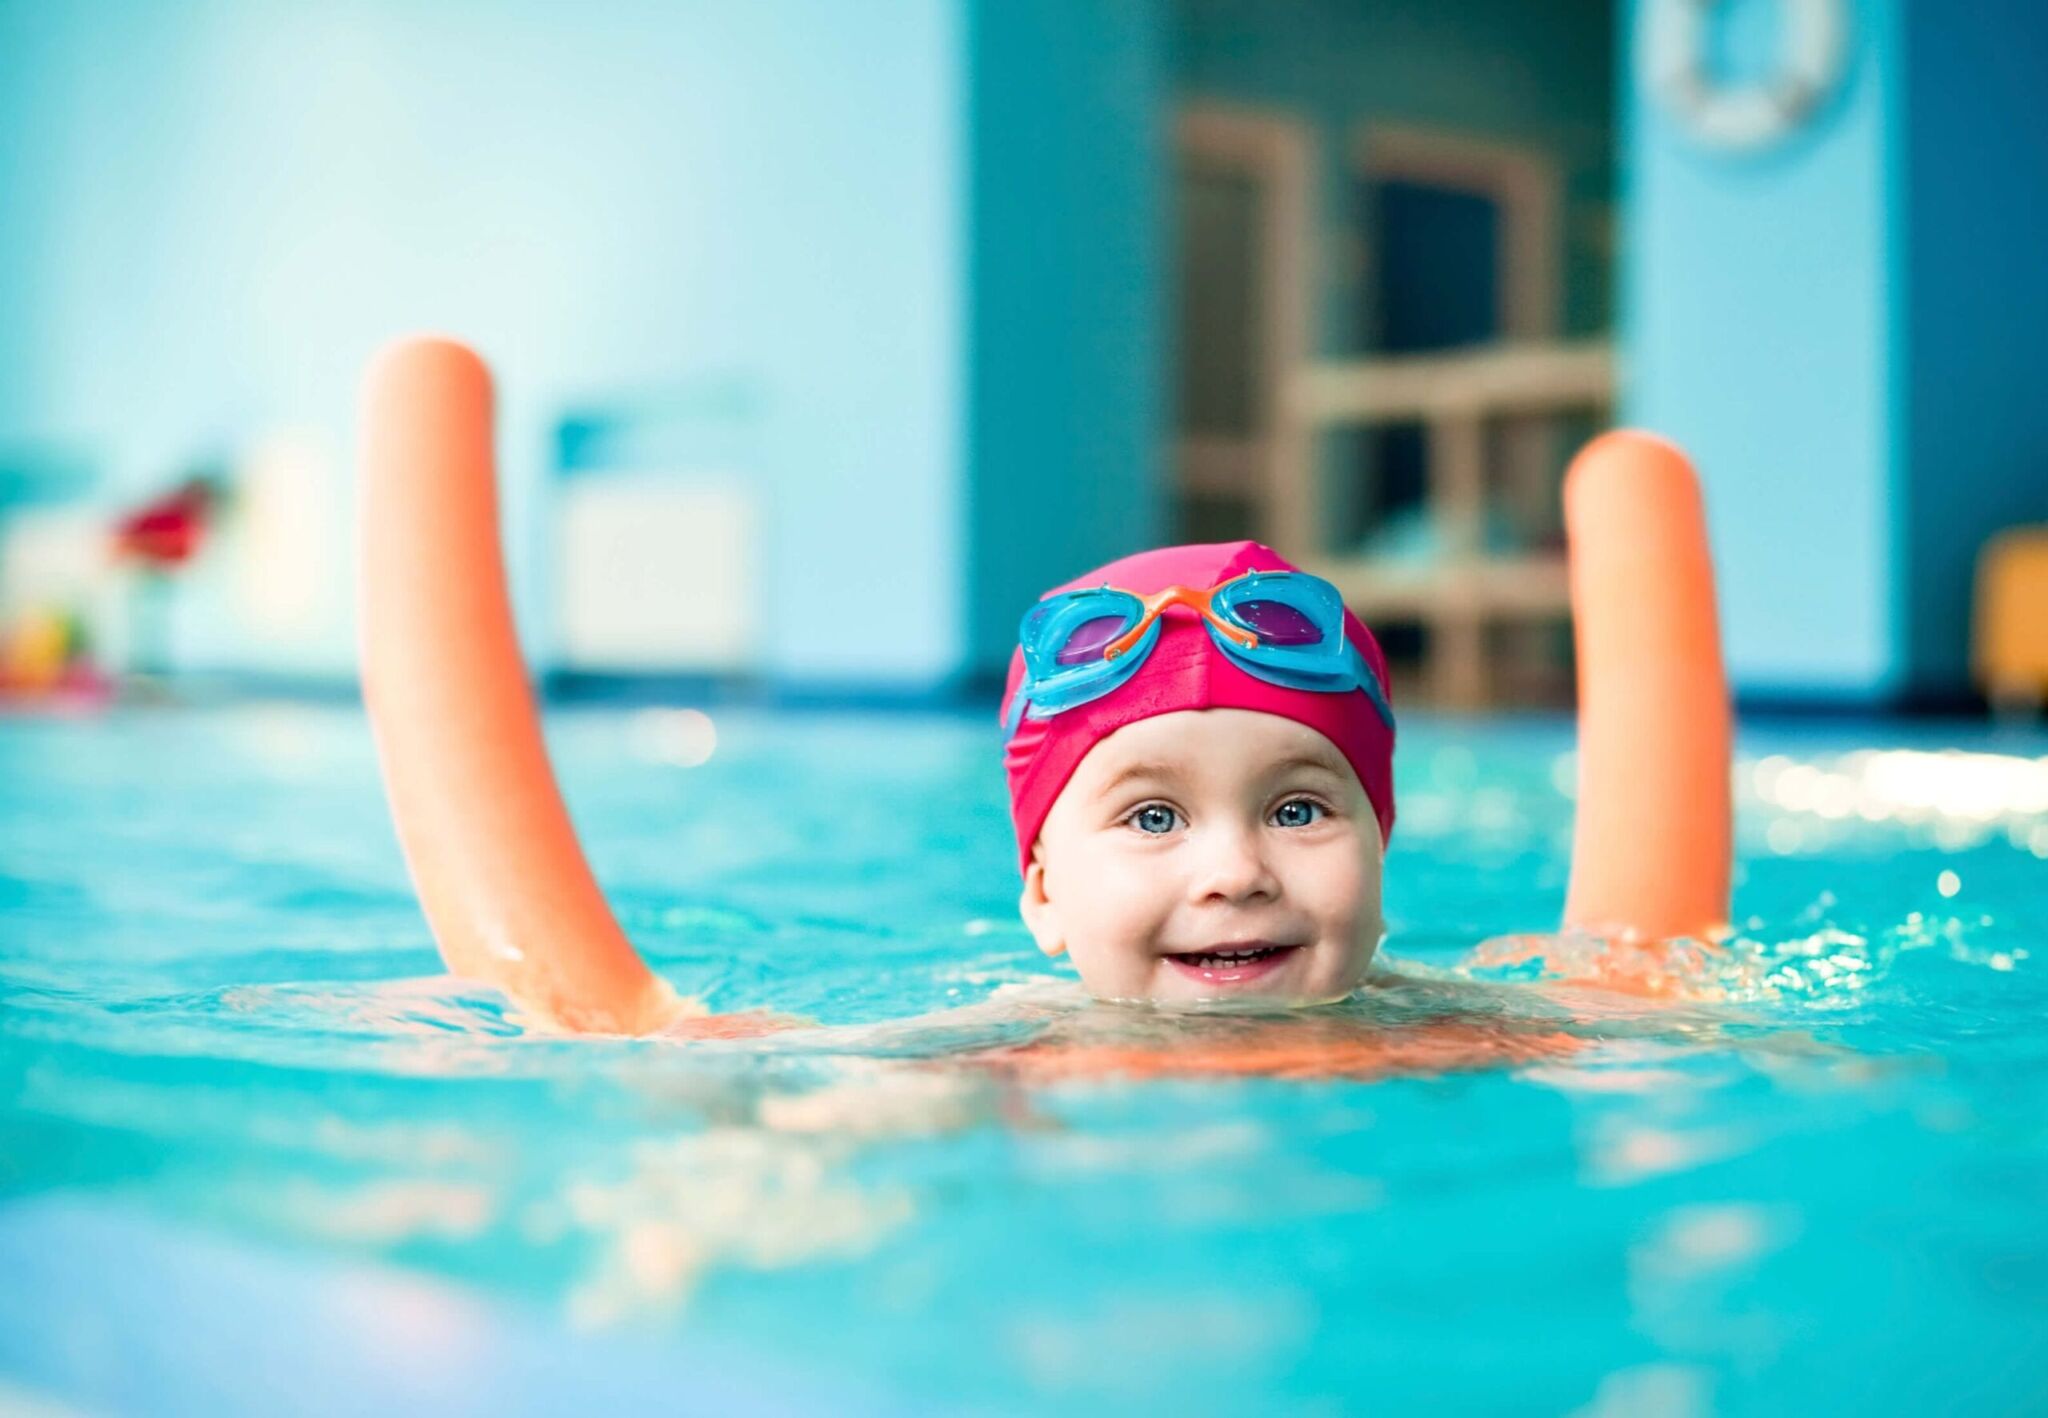 10 Tips for Teaching Your Children to Swim